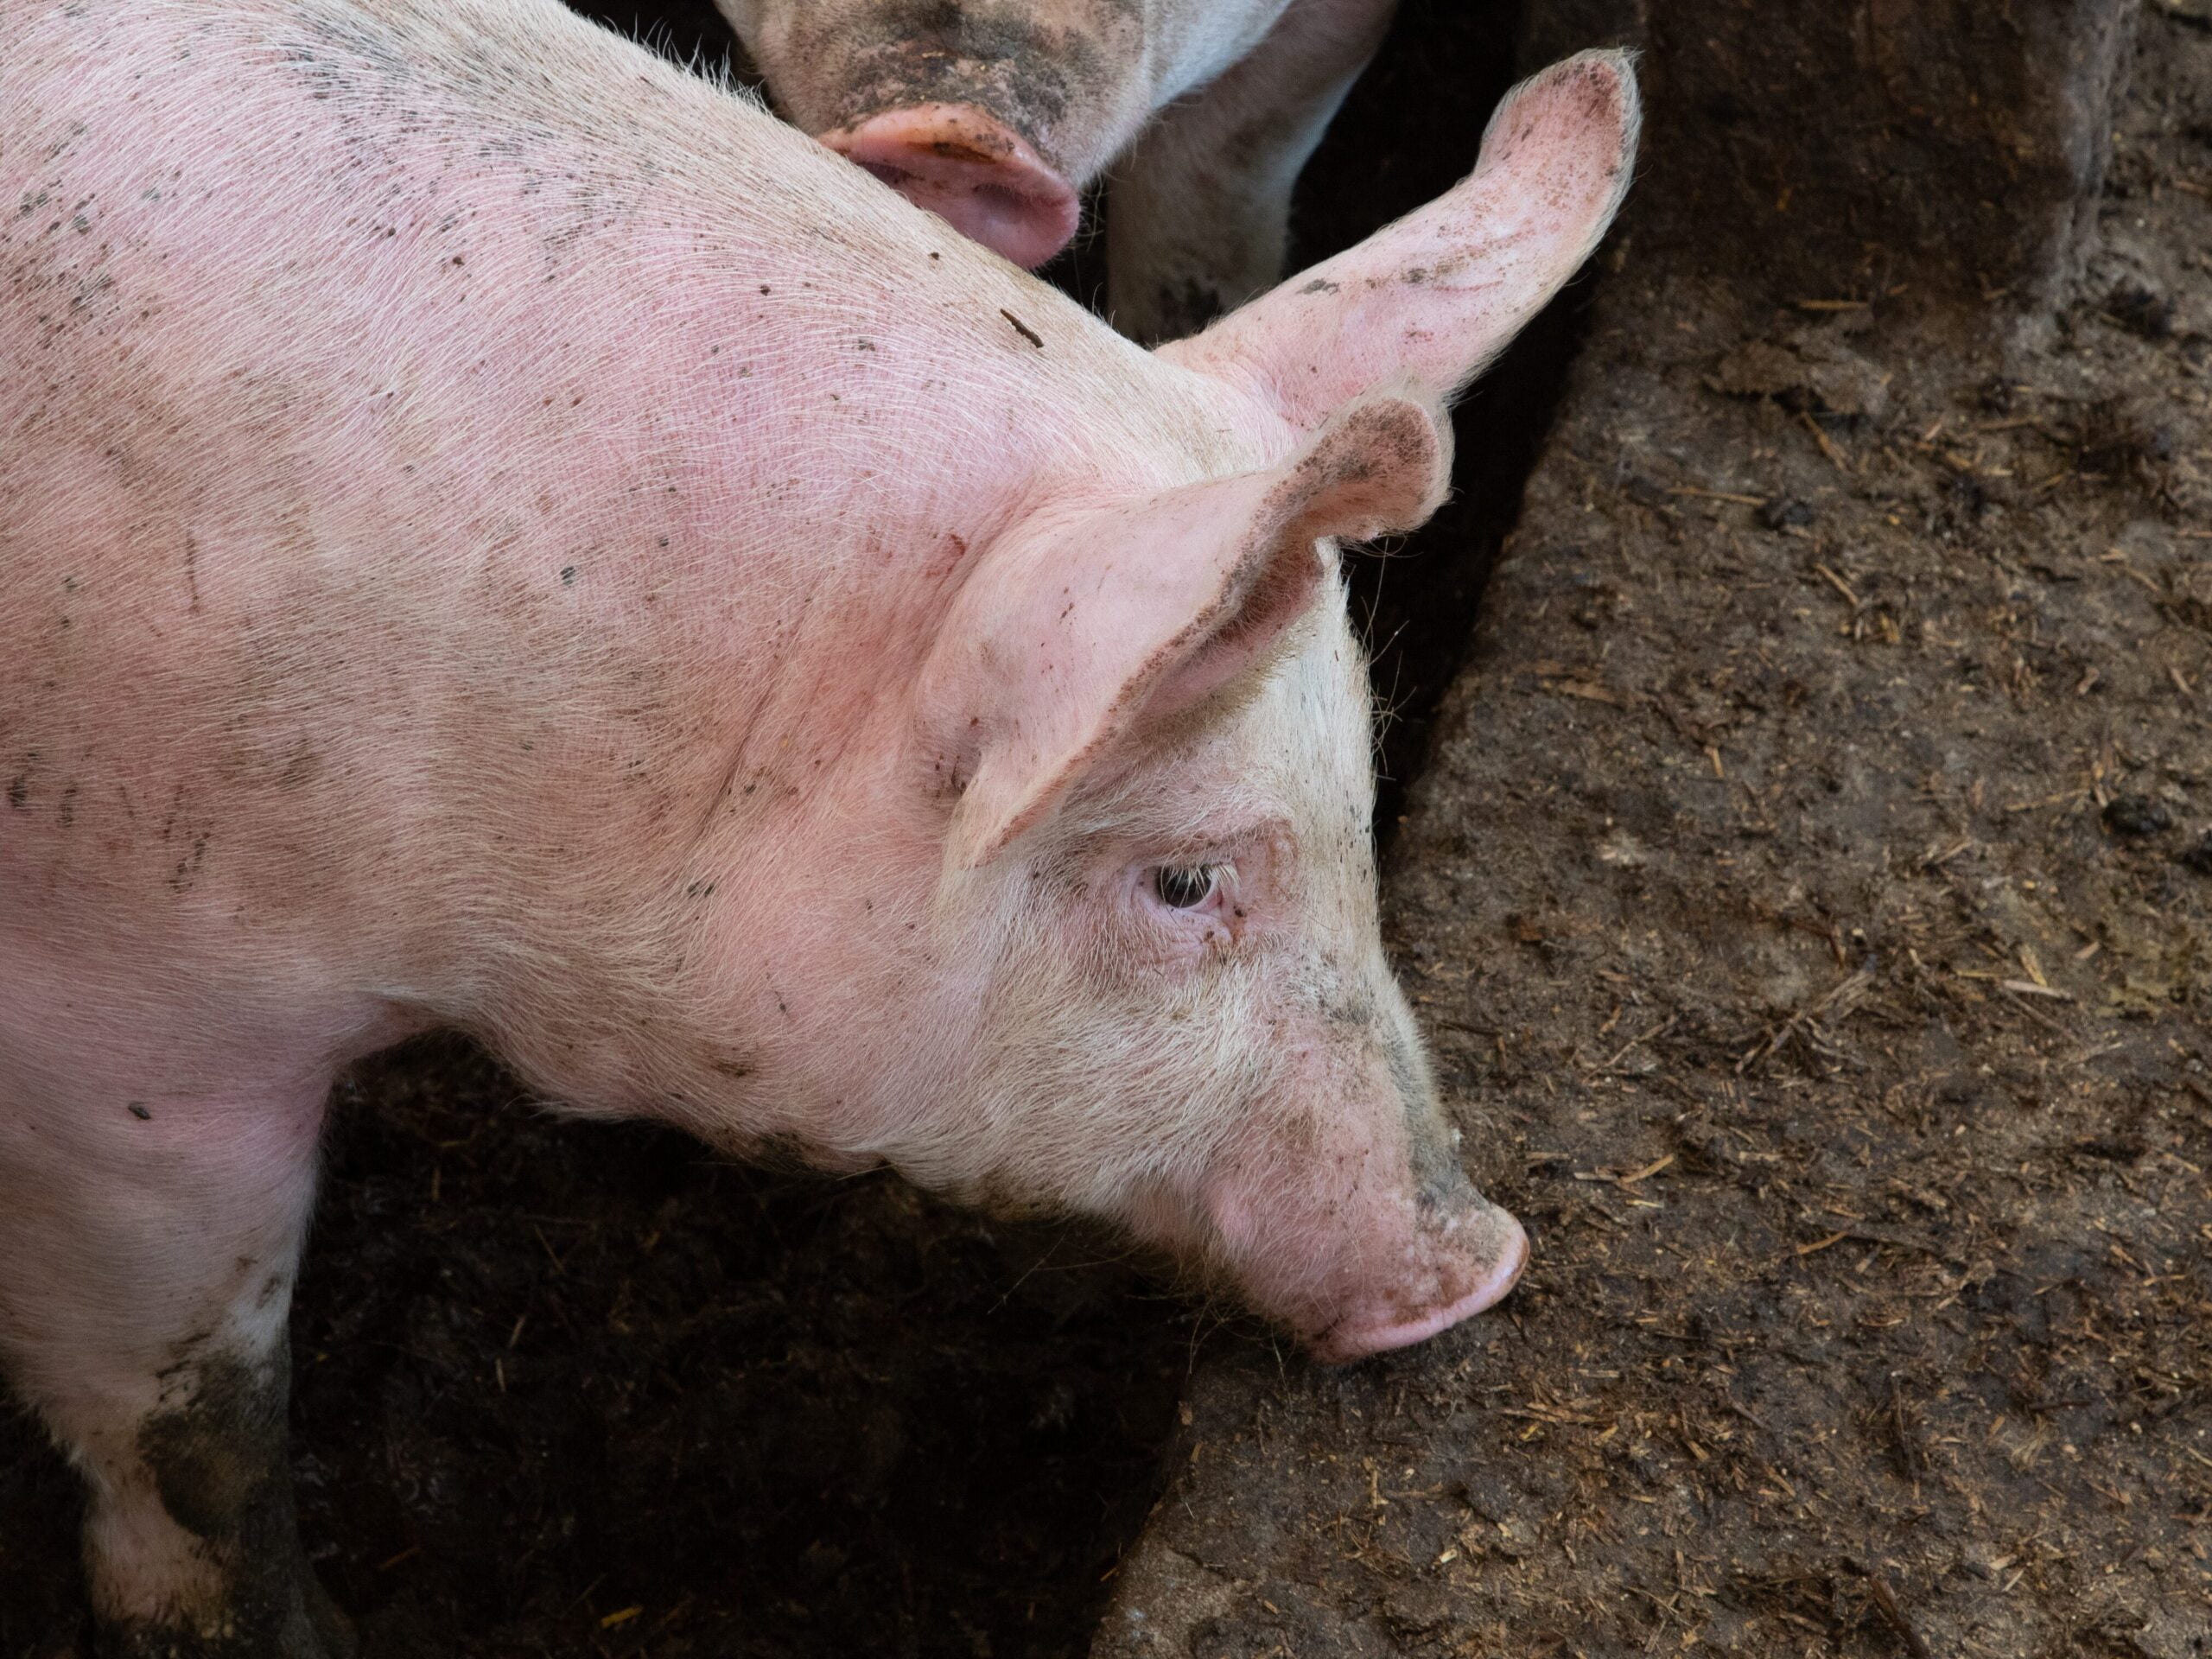 Right side angle of pigs eating from a trough focused on the front part of it's body